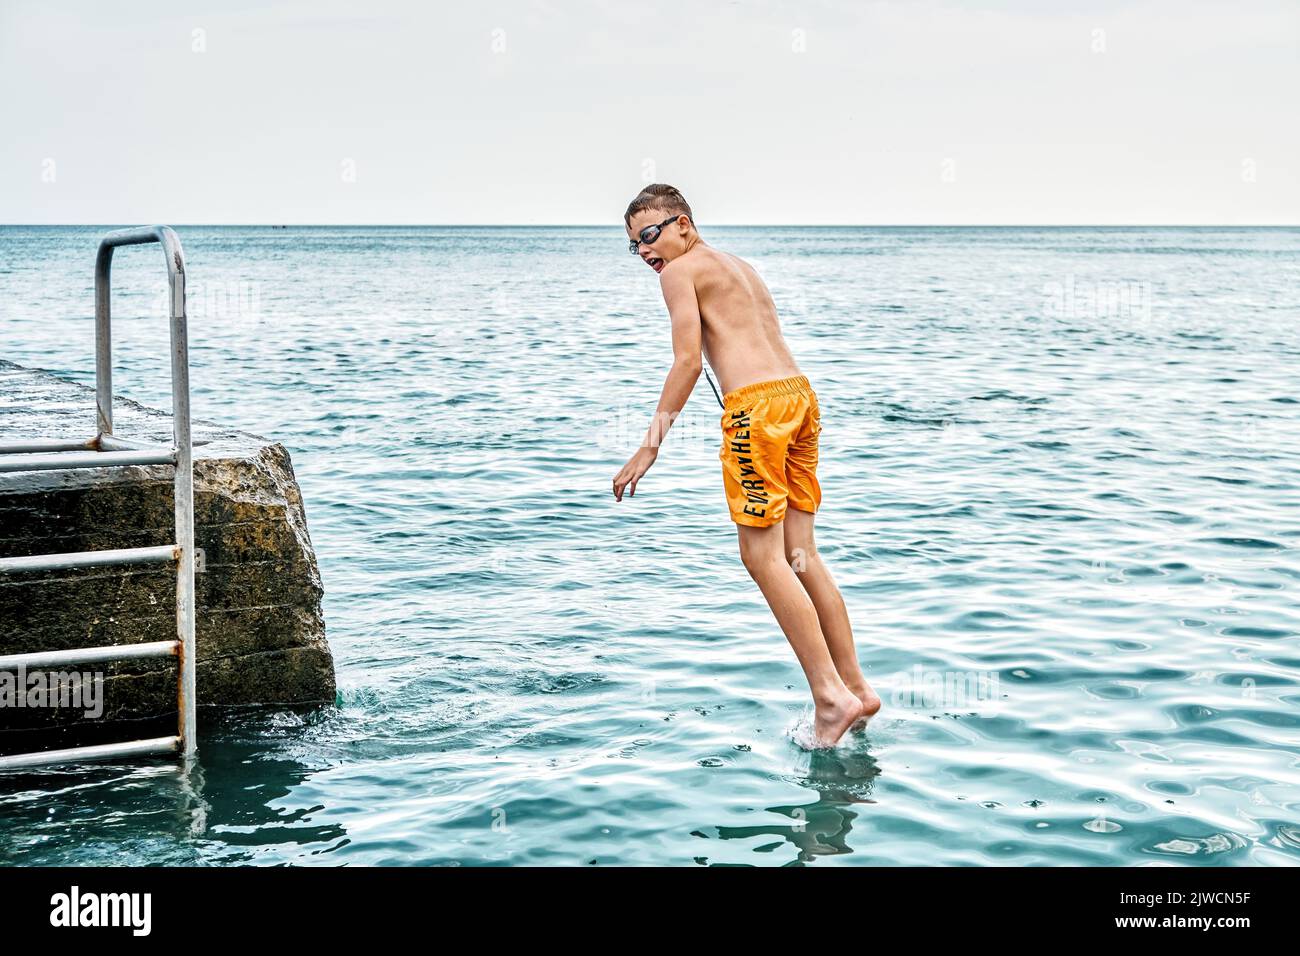 Moments of schoolboy jumping from stone pier with ladder into sea doing tricks in combined image sequence Stock Photo